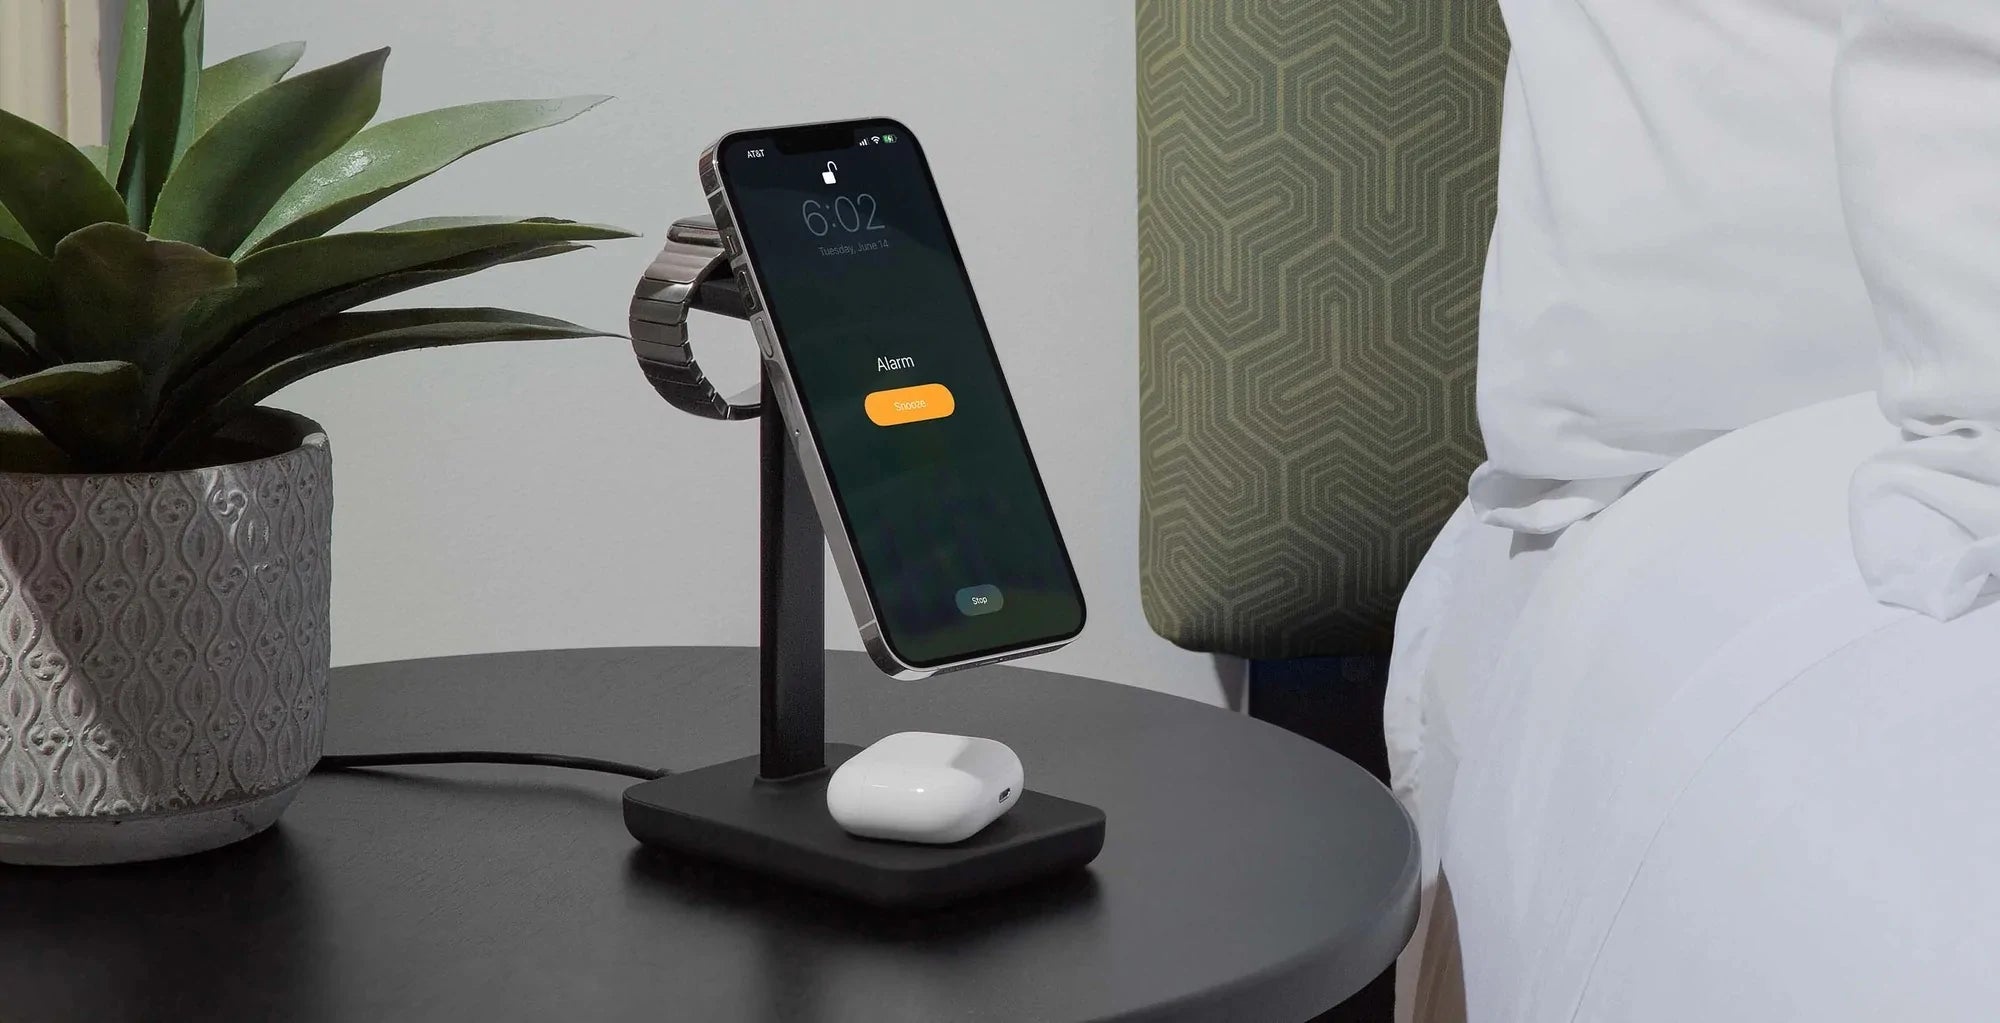 Twelve South HiRise 3 Wireless 3-in 1 Charging Stand